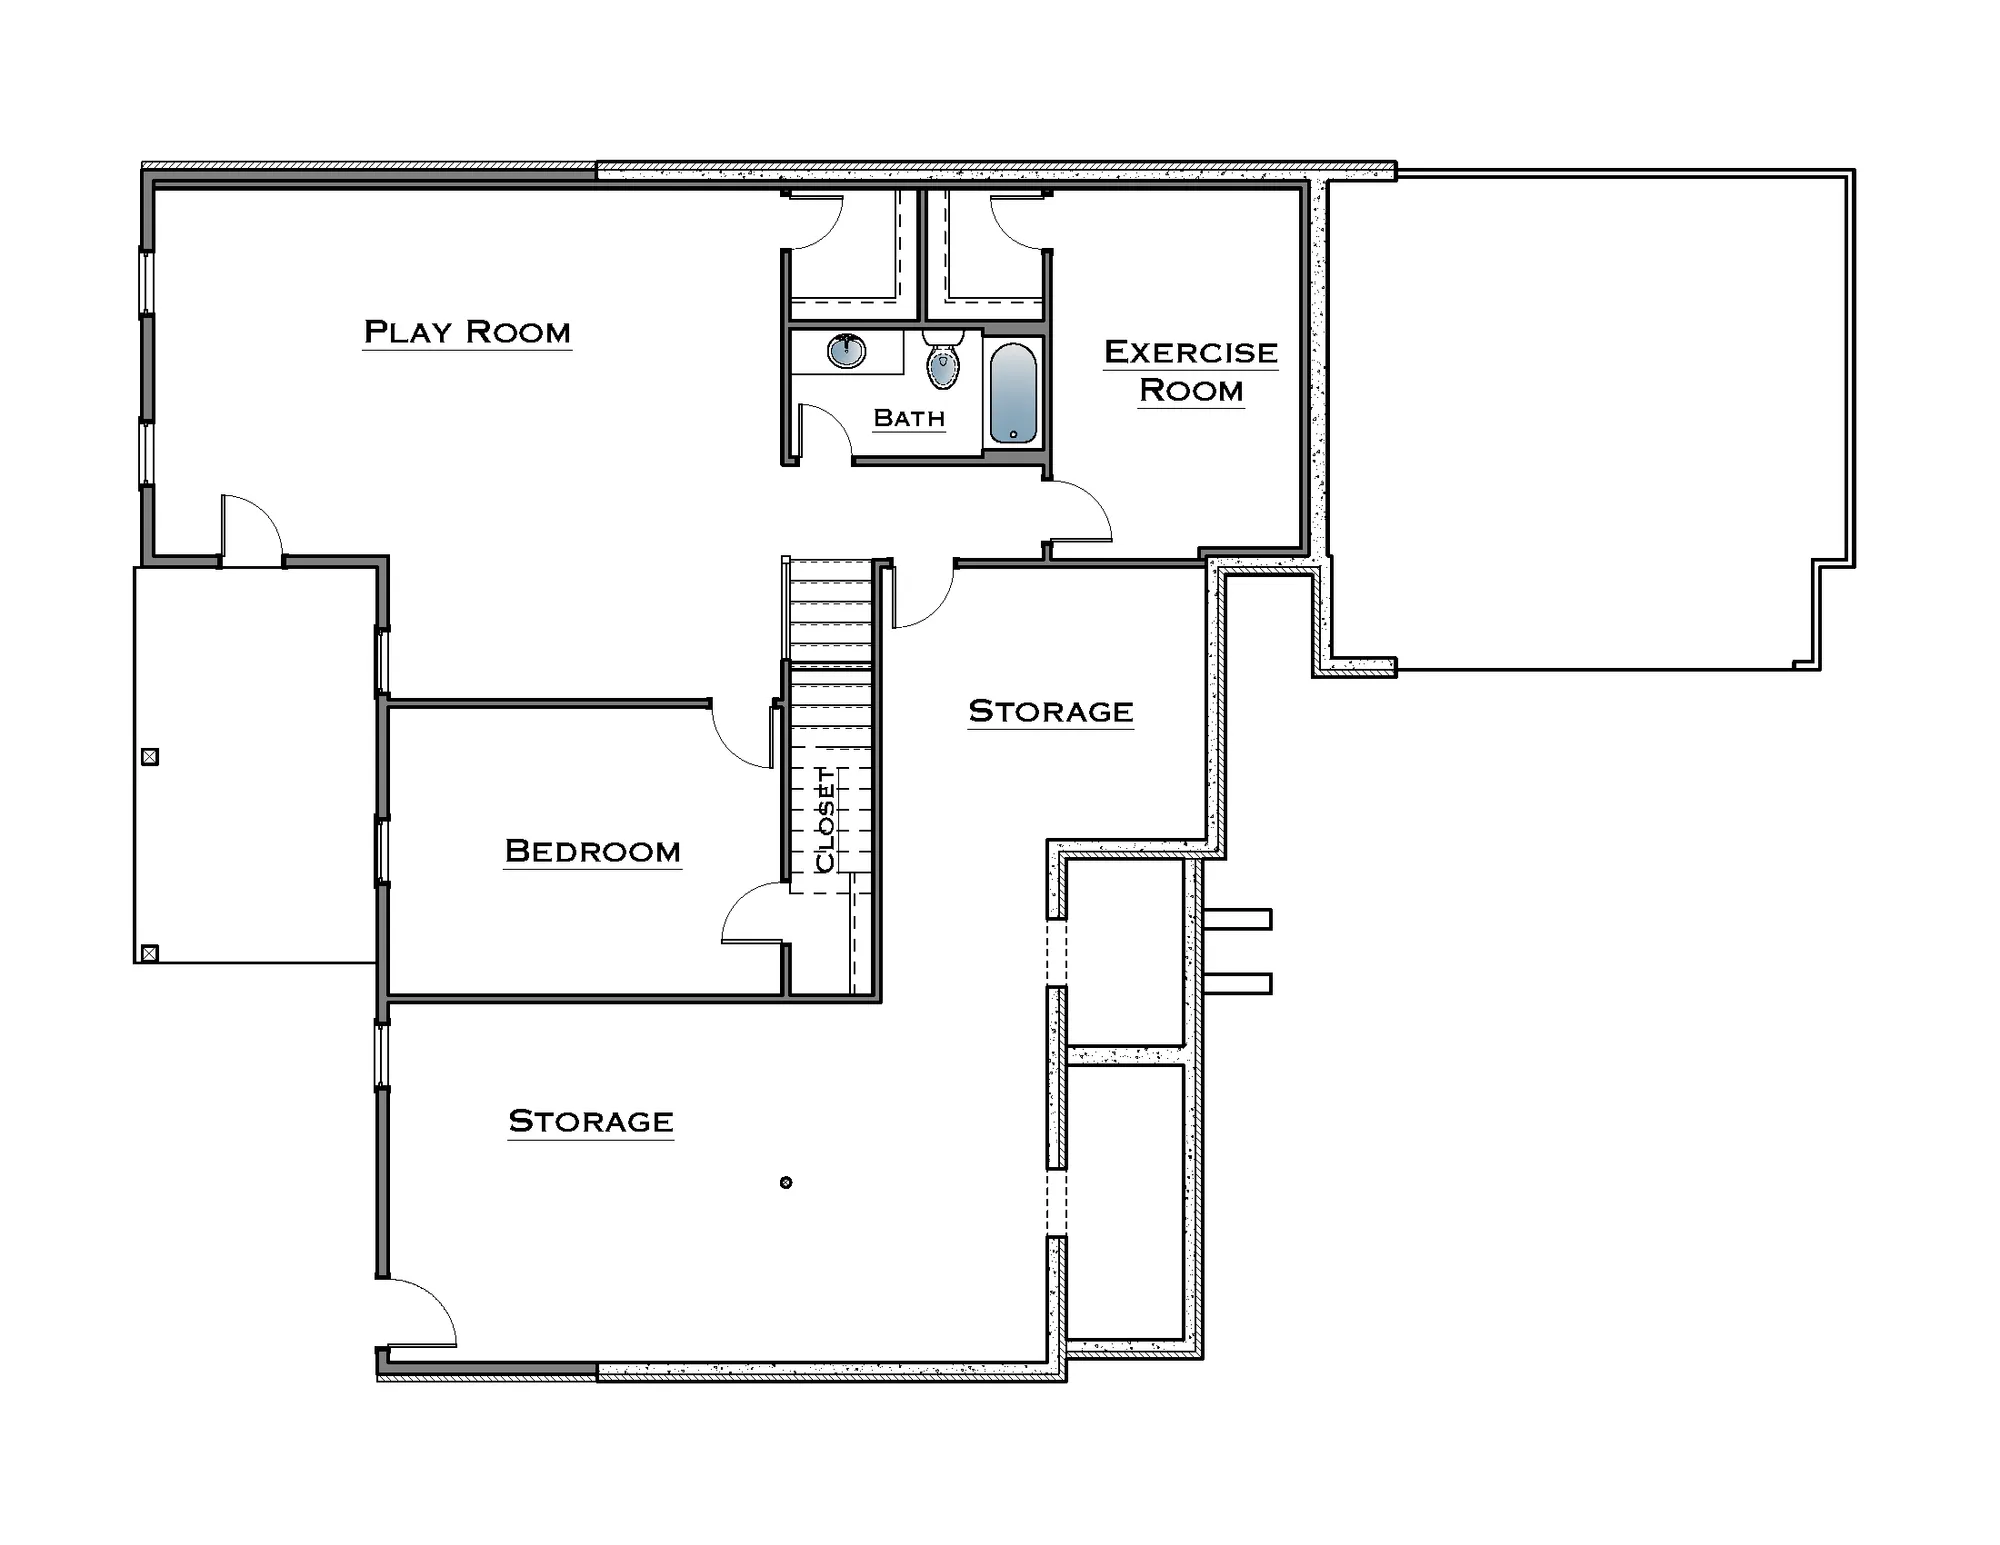 Finished Basement with Breakfast Nook Option, Exercise Room, Play Room, Bedroom, Full Bath, & Unfinished Storage - undefined